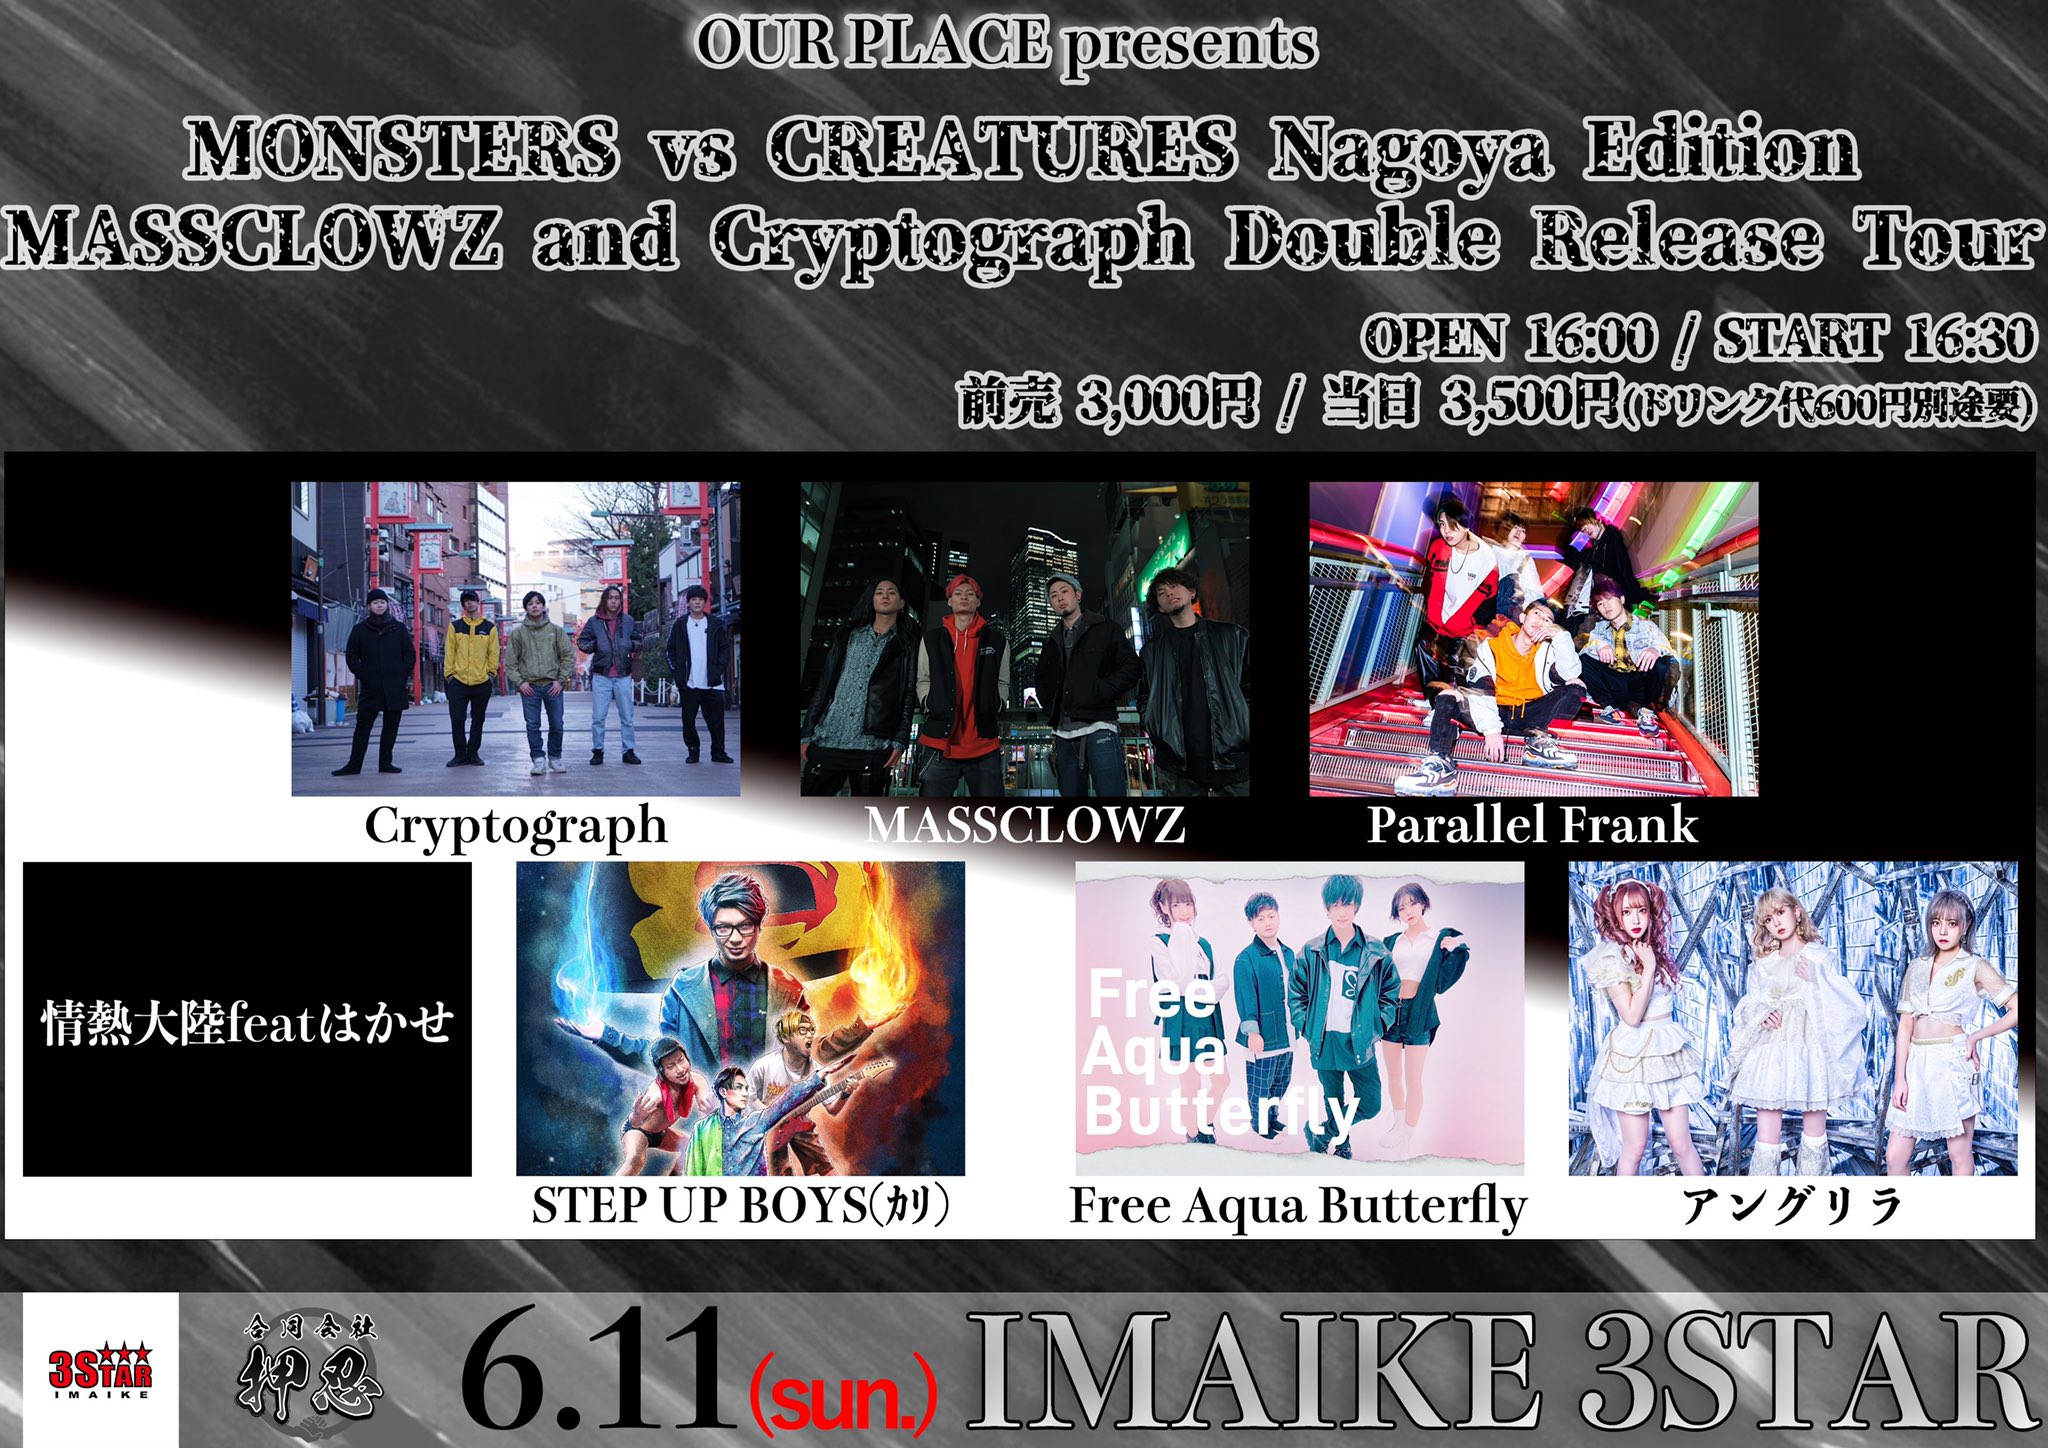 MONSTERS vs CREATURES 〜Nagoya Edition〜 MASSCLOWZ and Cryptograph Double Release